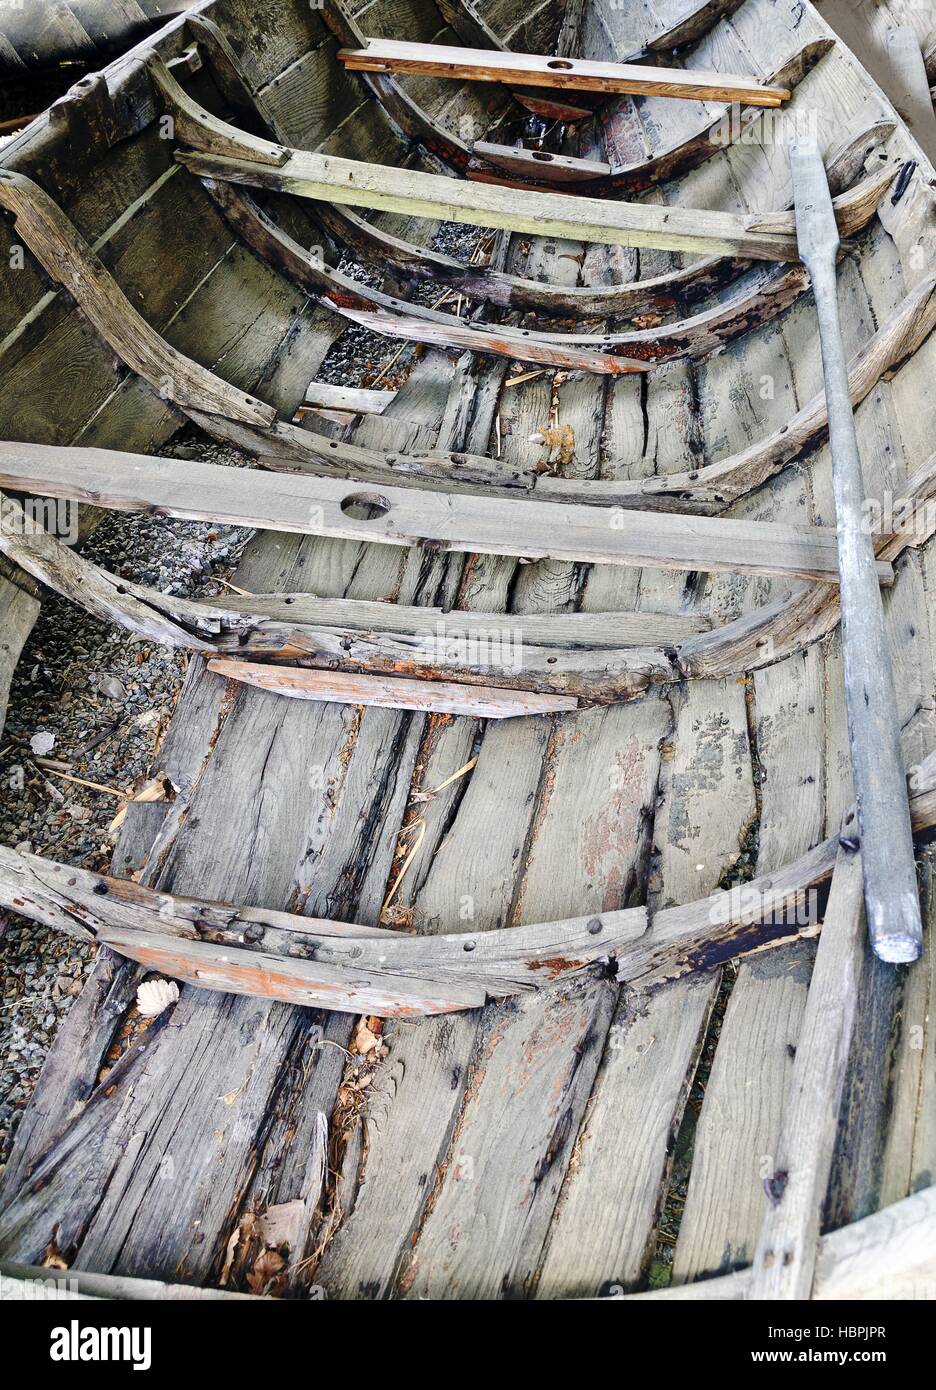 wreck of an old wooden rowing boat Stock Photo